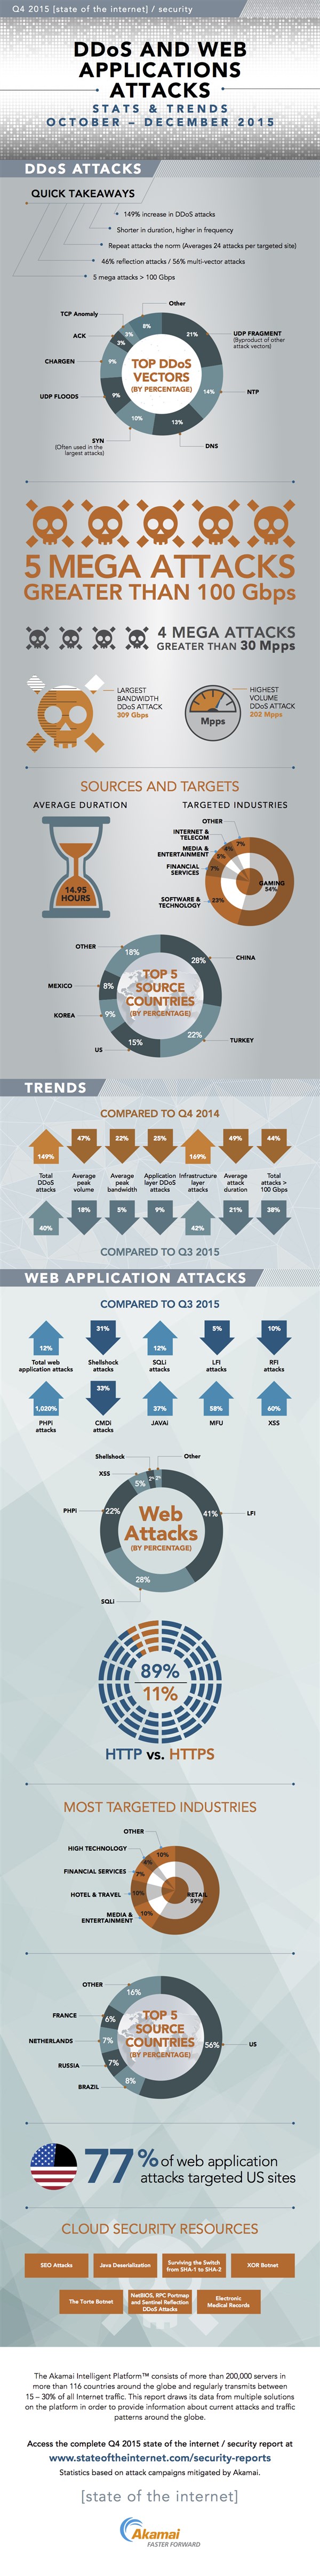 Akamai-Q4-2015-State-of-the-Internet-Security-Infographic